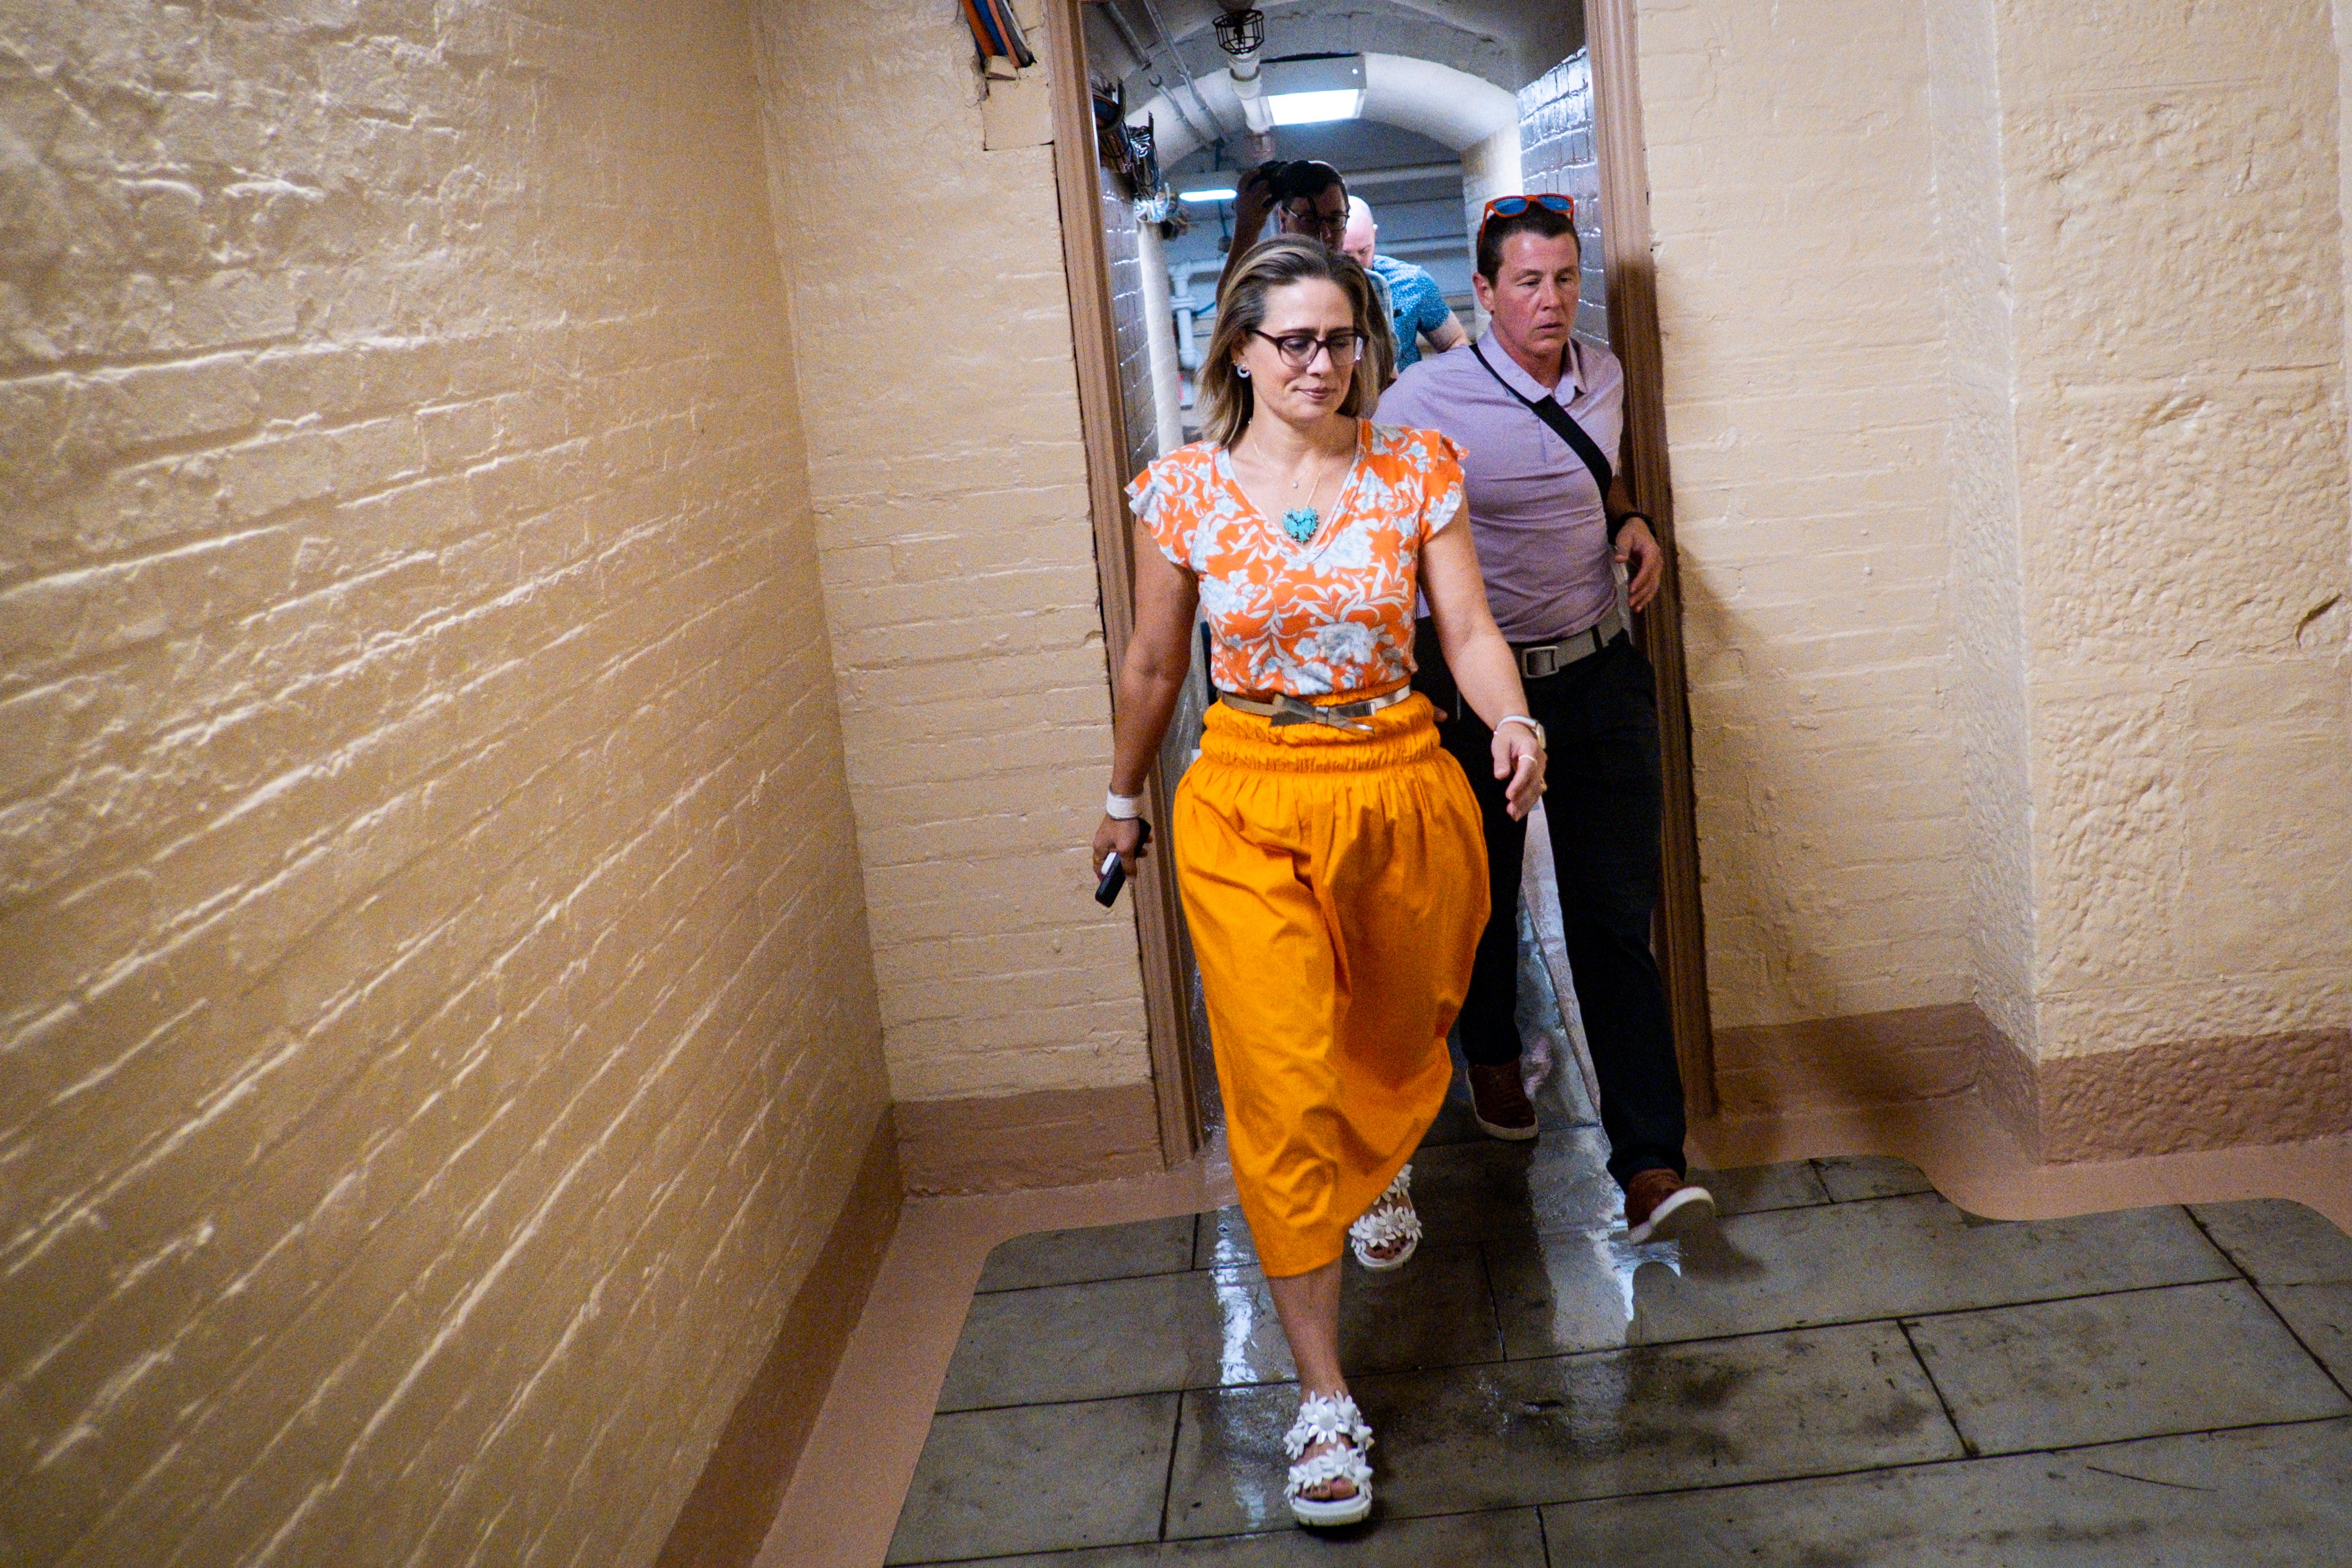 Democratic Senator Kyrsten Sinema makes her way to the Senate floor on 4th August, 2022. She has agreed to add her critical support her party’s Inflation Reduction Act which will provide meaningful climate action